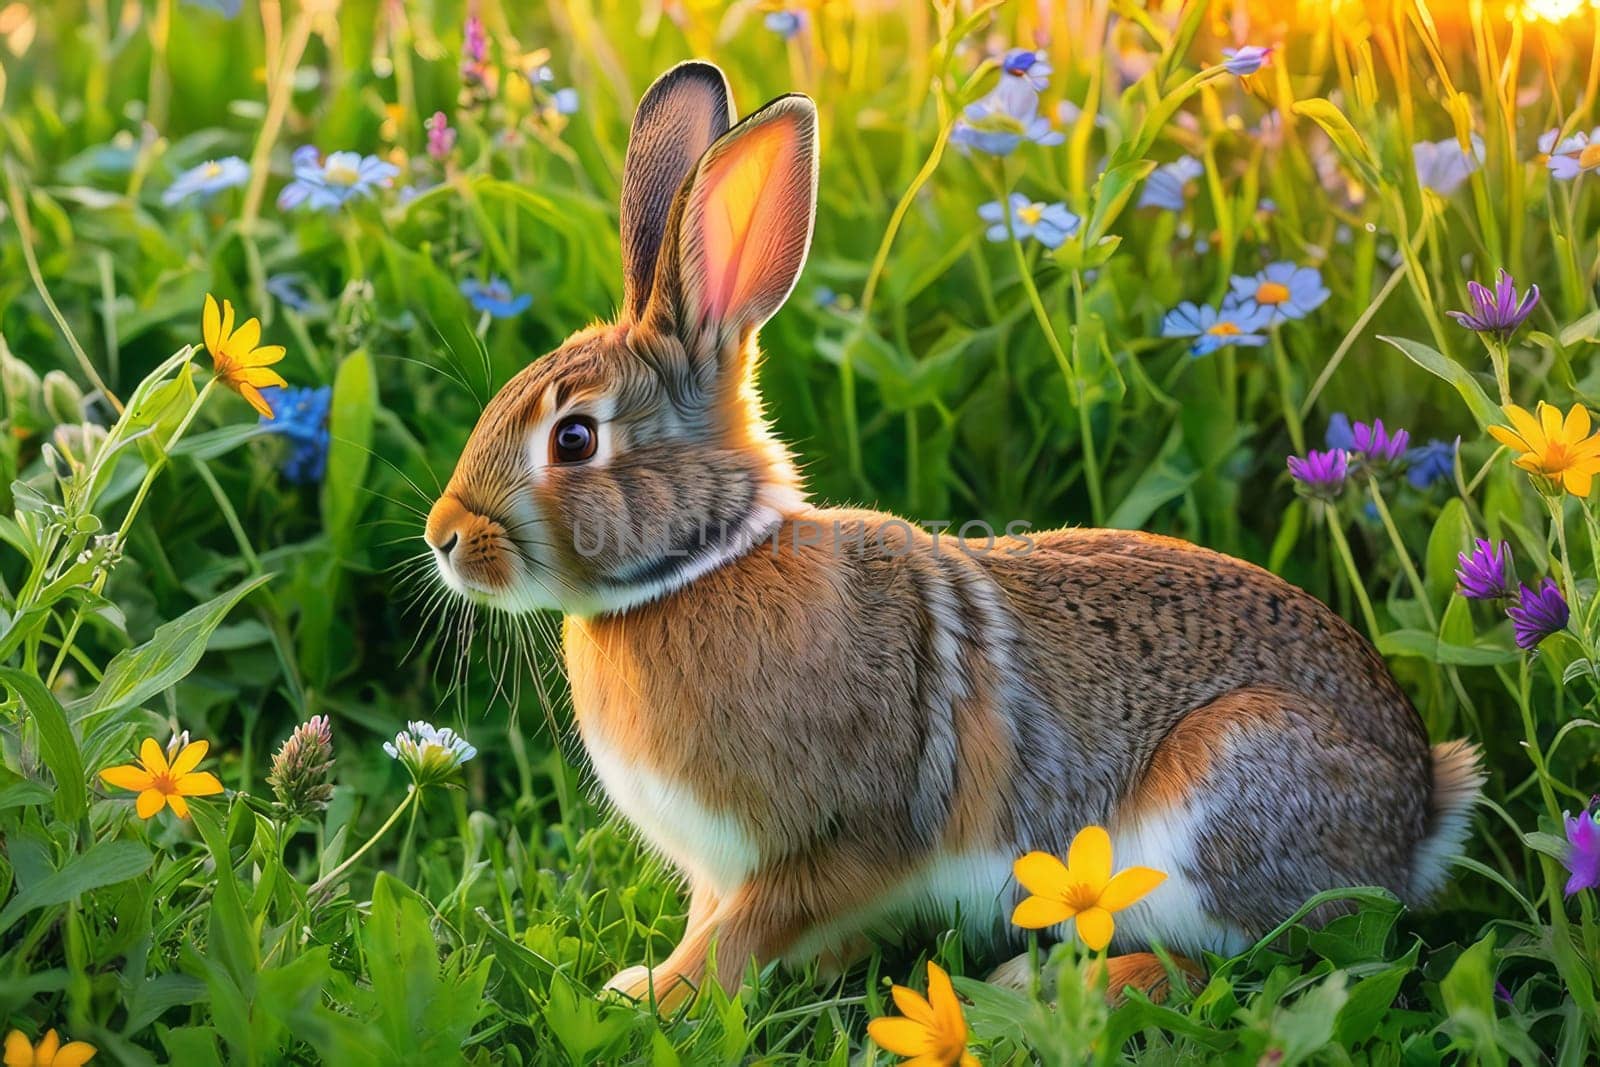 Rabbit on the lawn with flowers at sunset.